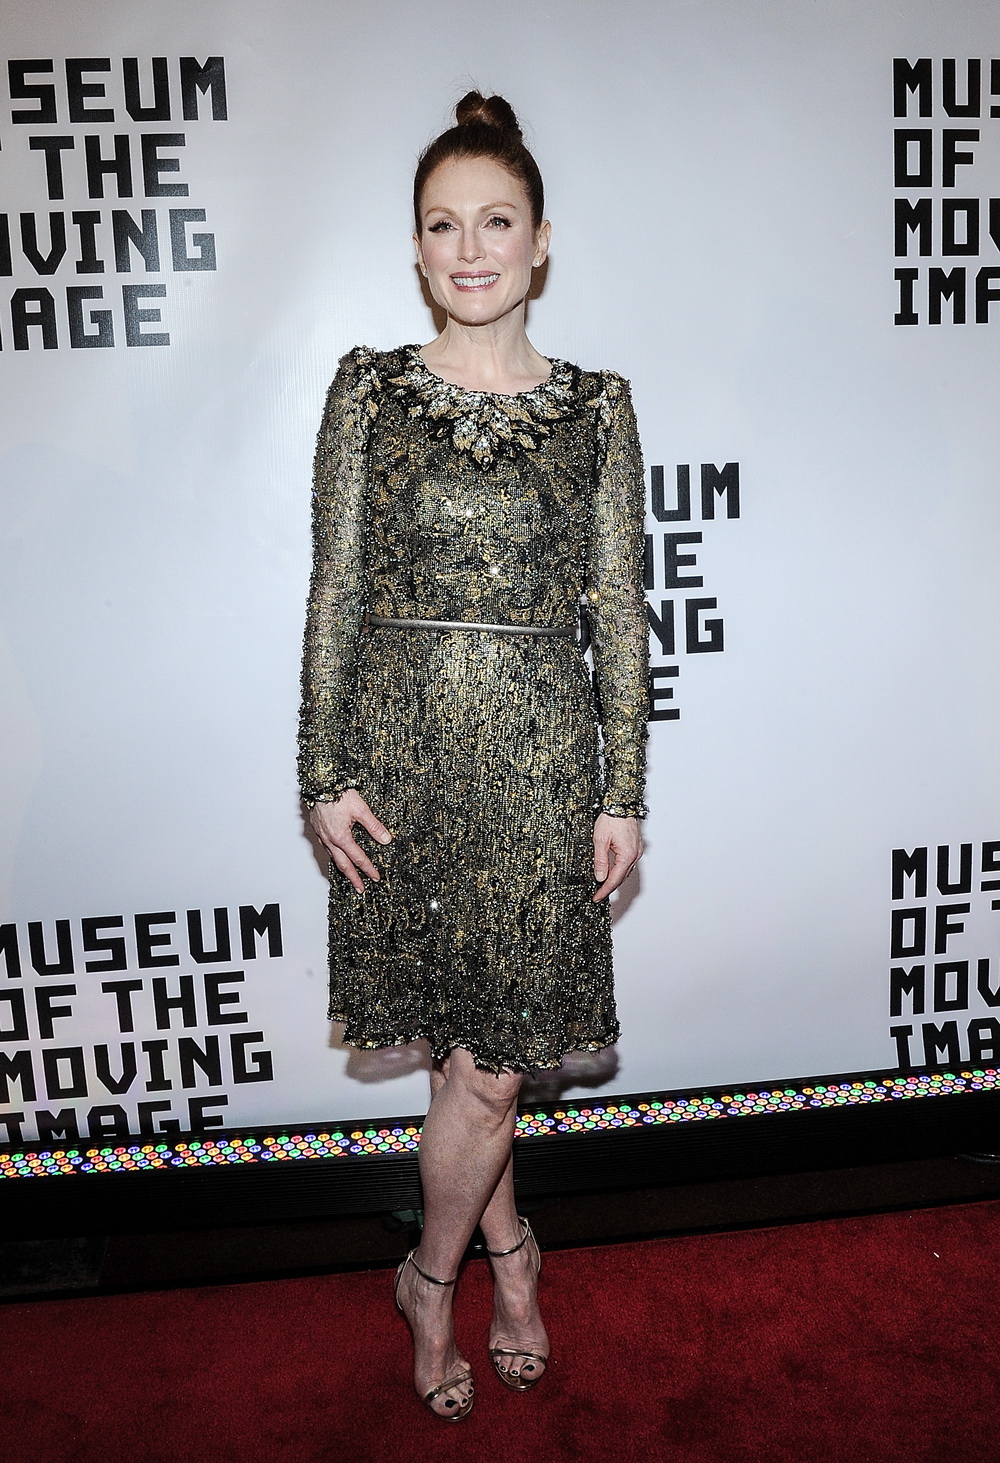 NEW YORK, NY - JANUARY 20:  Actress Julianne Moore attends Museum Of The Moving Image Honors Julianne Moore at 583 Park Avenue on January 20, 2015 in New York City.  (Photo by Daniel Zuchnik/WireImage)